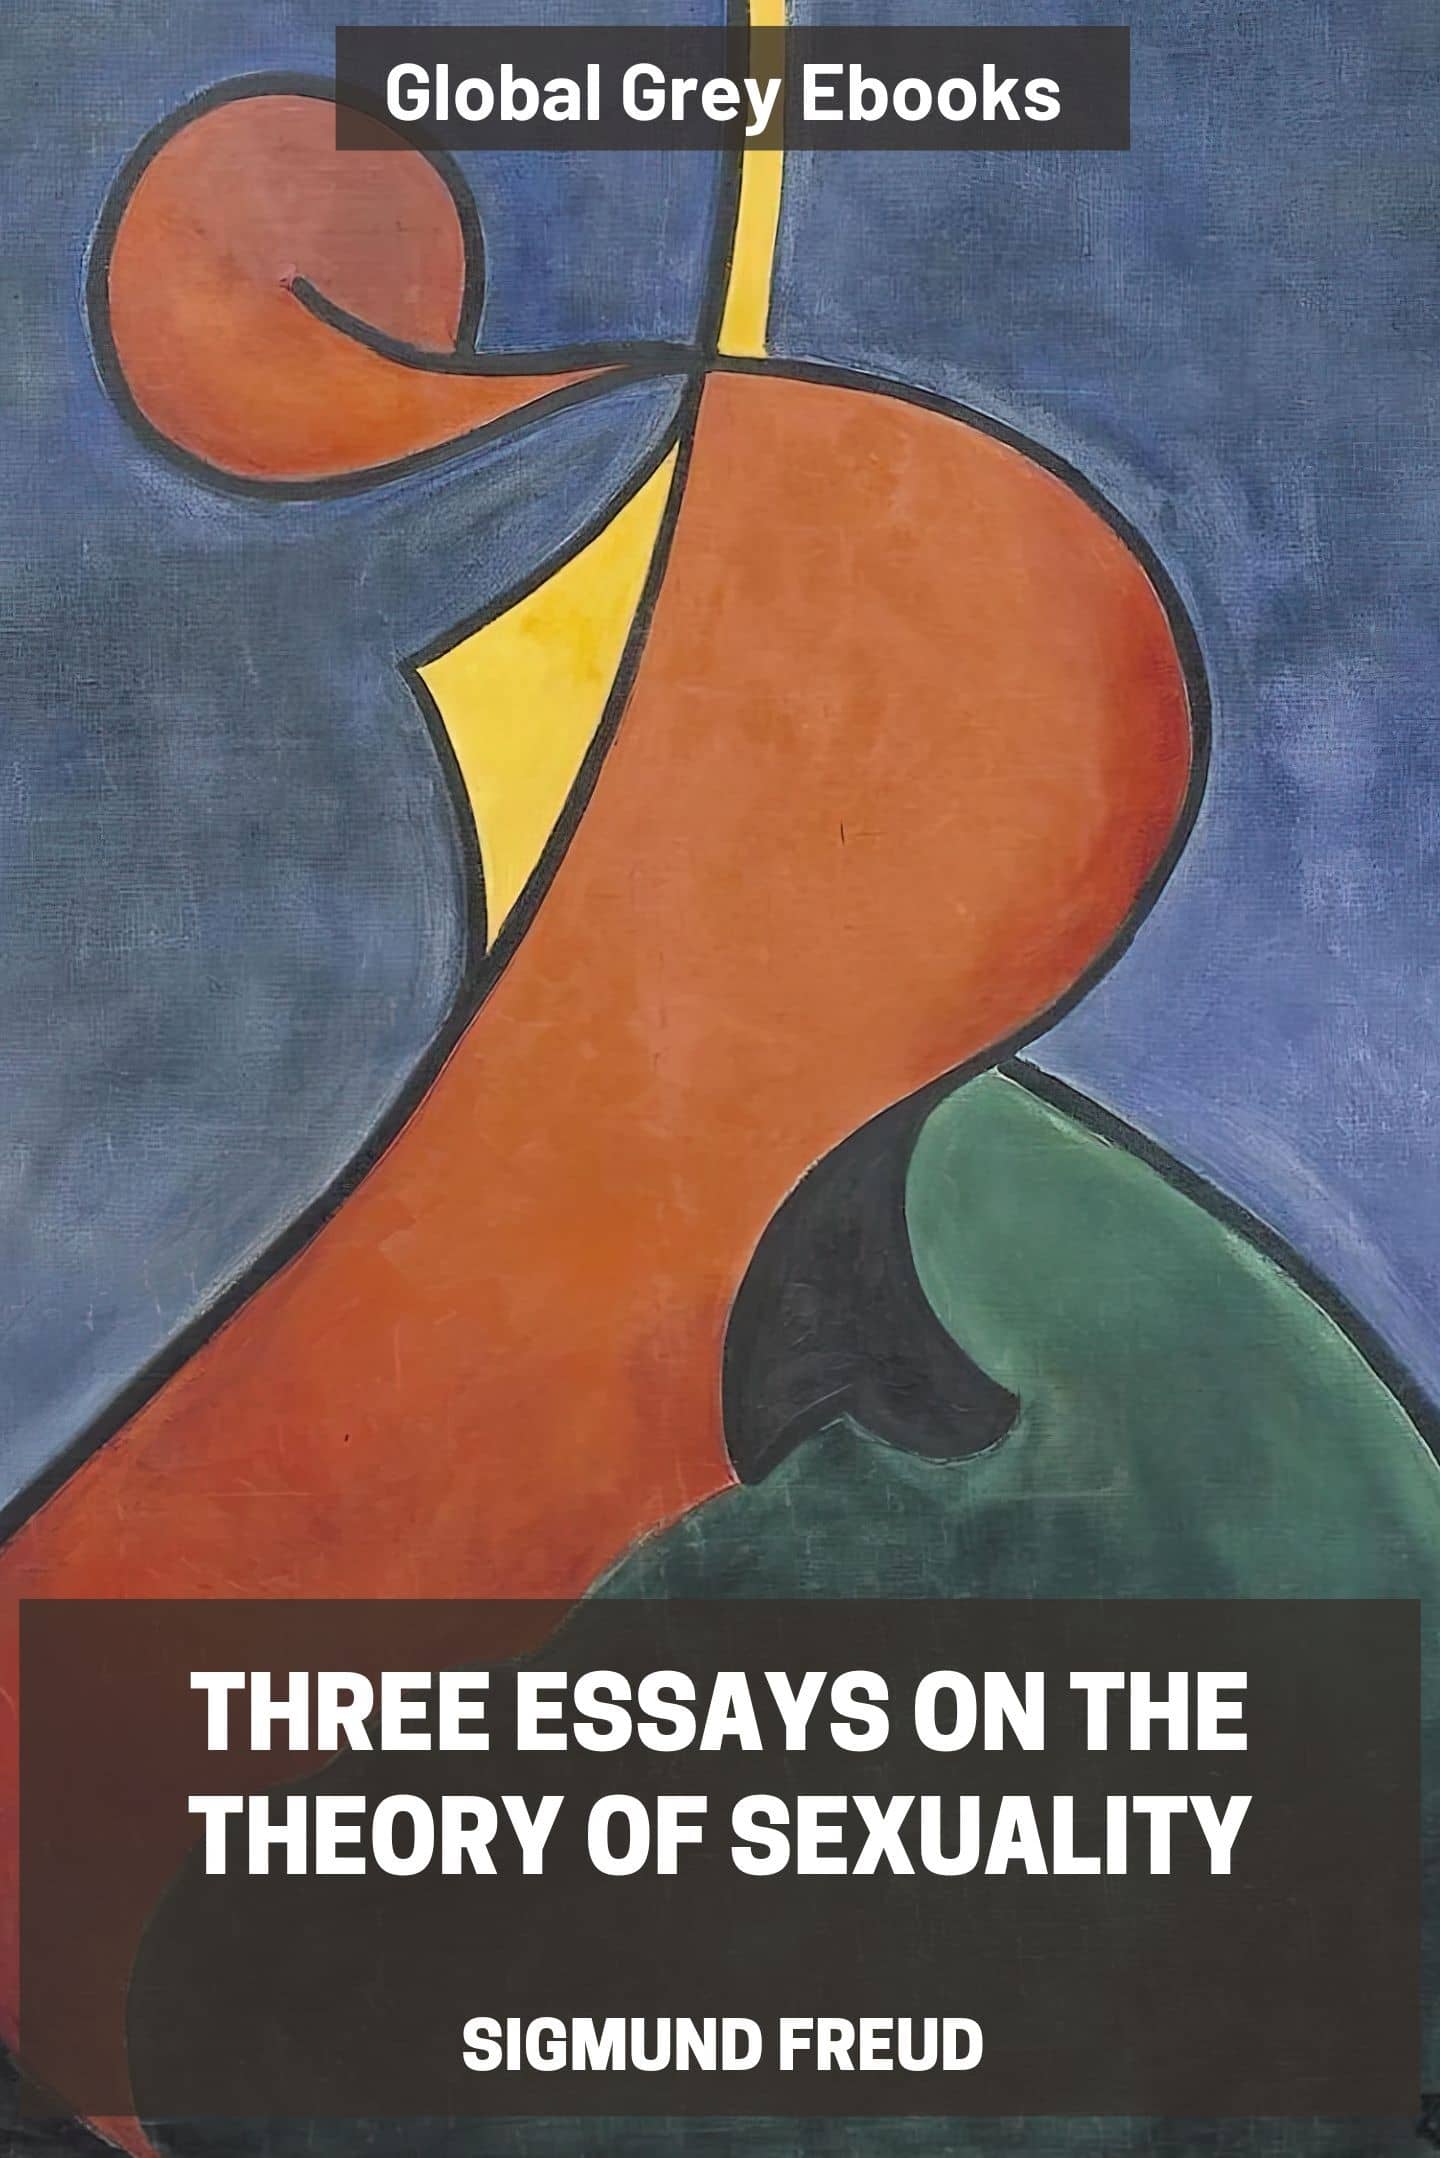 freud three essays on the theory of sexuality pdf